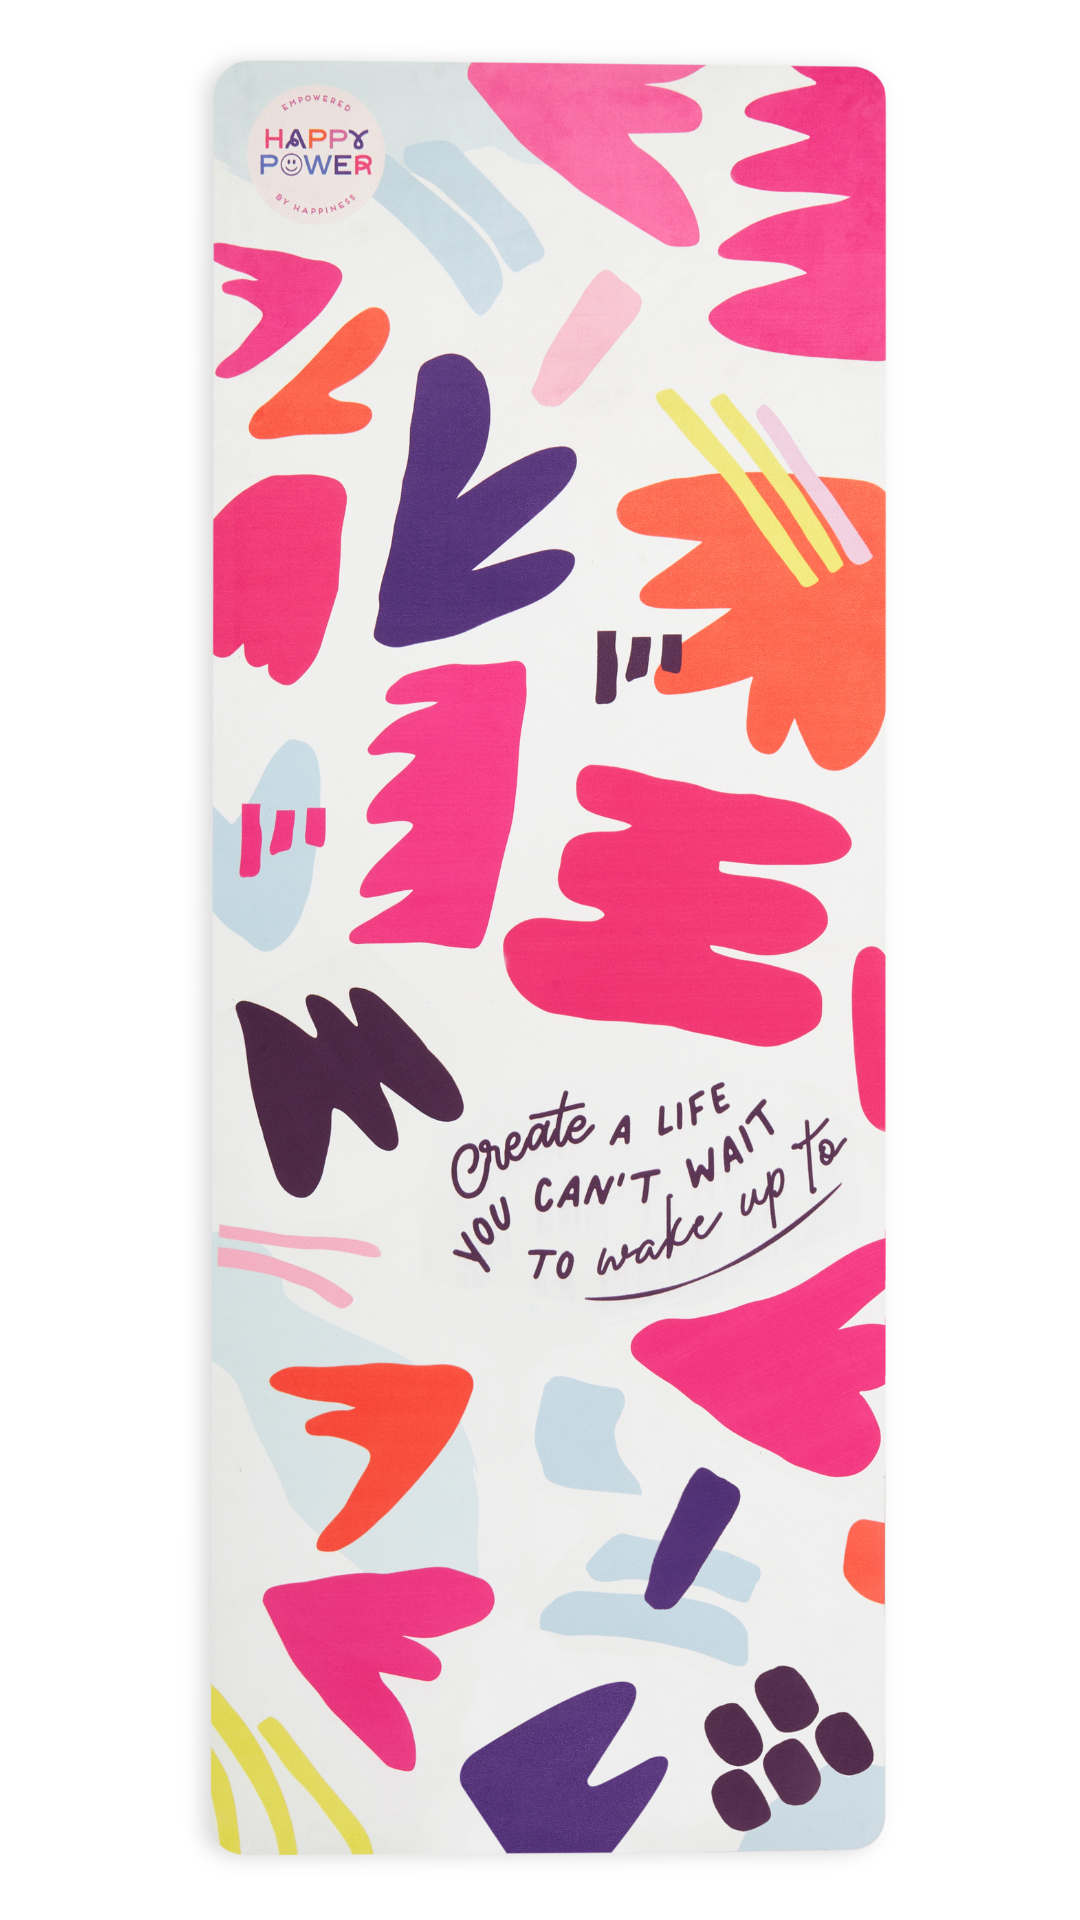 Eco friendly yoga and exercise mat featuring bold pink, orange, blue and yellow design on a white background.  Text reads 'Create a life you can’t wait to wake up to'